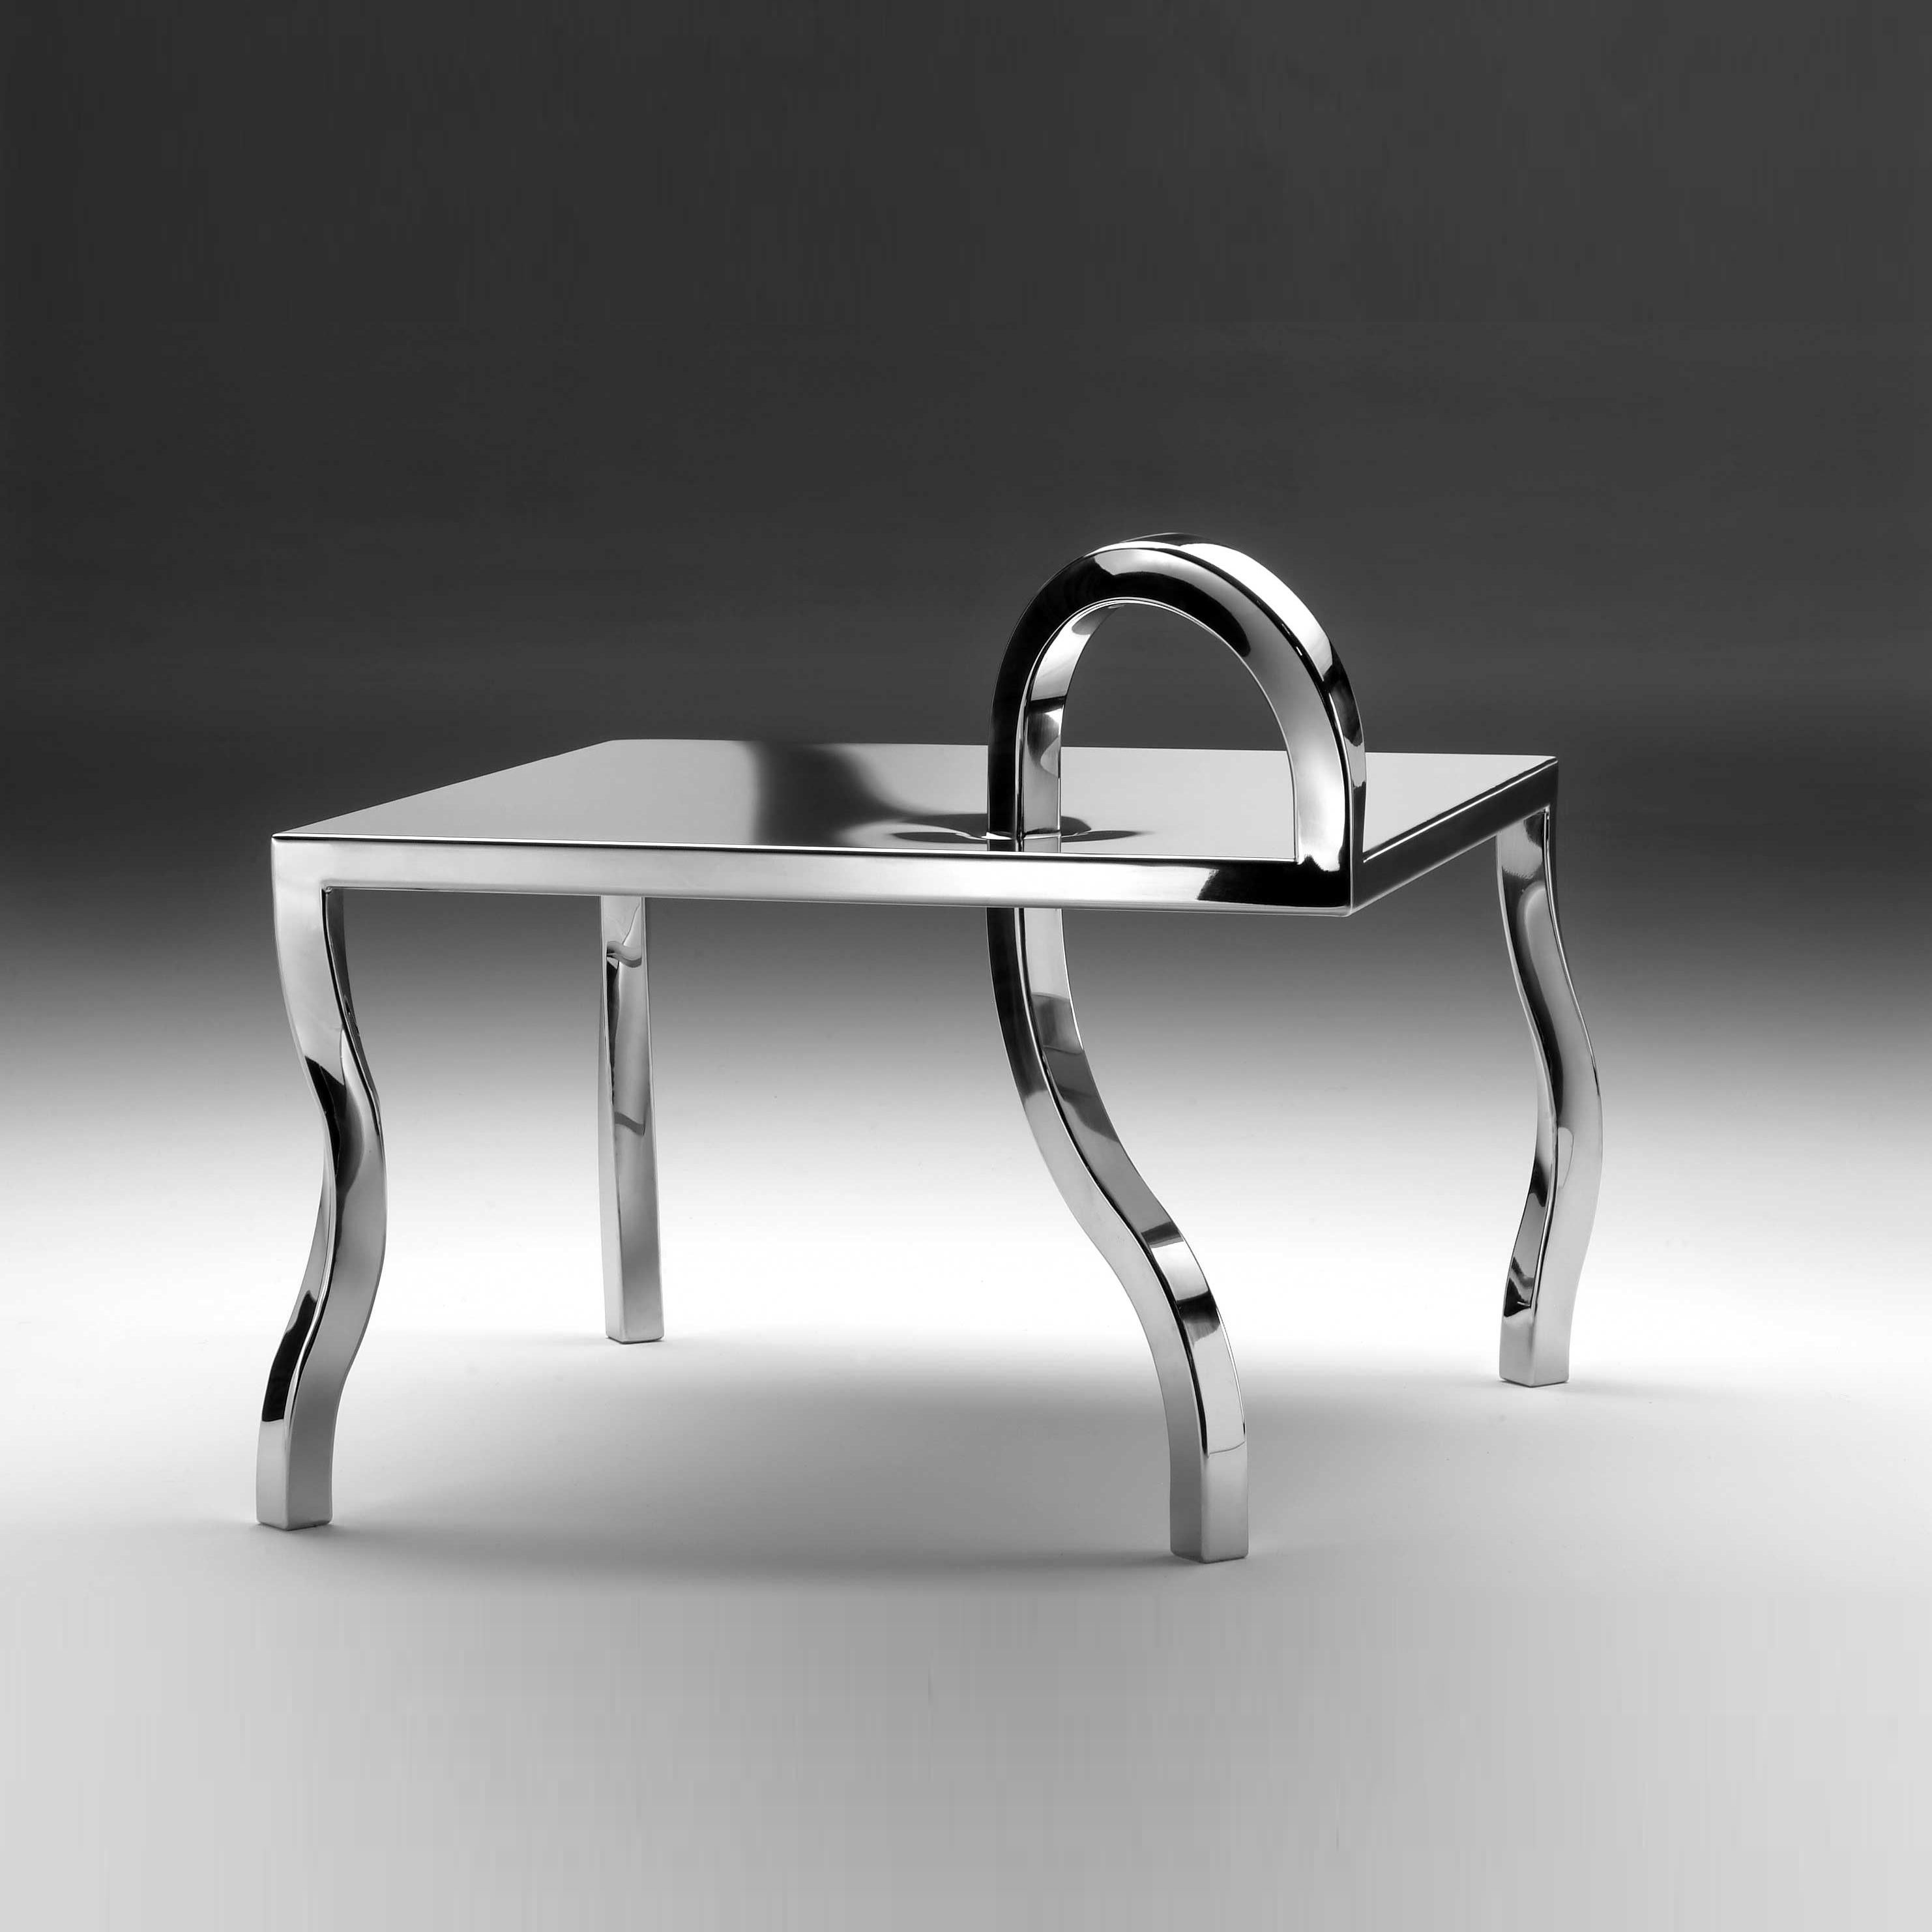 Coffee table - Anomalie Collection designed by Gio Minelli
Materials: Steel
Dimensions: 60 x 60 x h 40 cm

Collection made of polished stainless steel, handmade.
All these pieces have a common character: the curved, twisted legs. An idea of